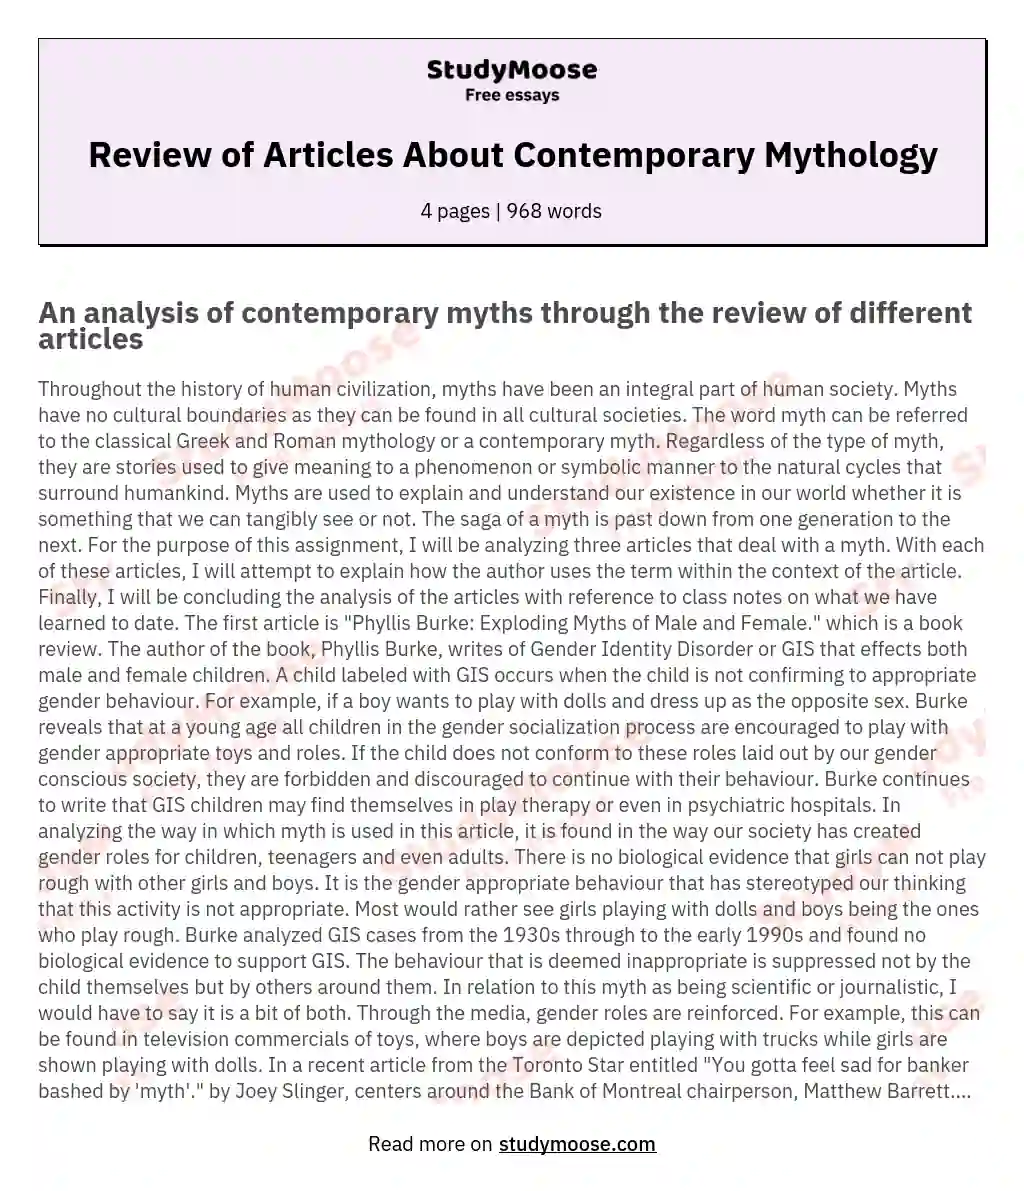 Review of Articles About Contemporary Mythology essay